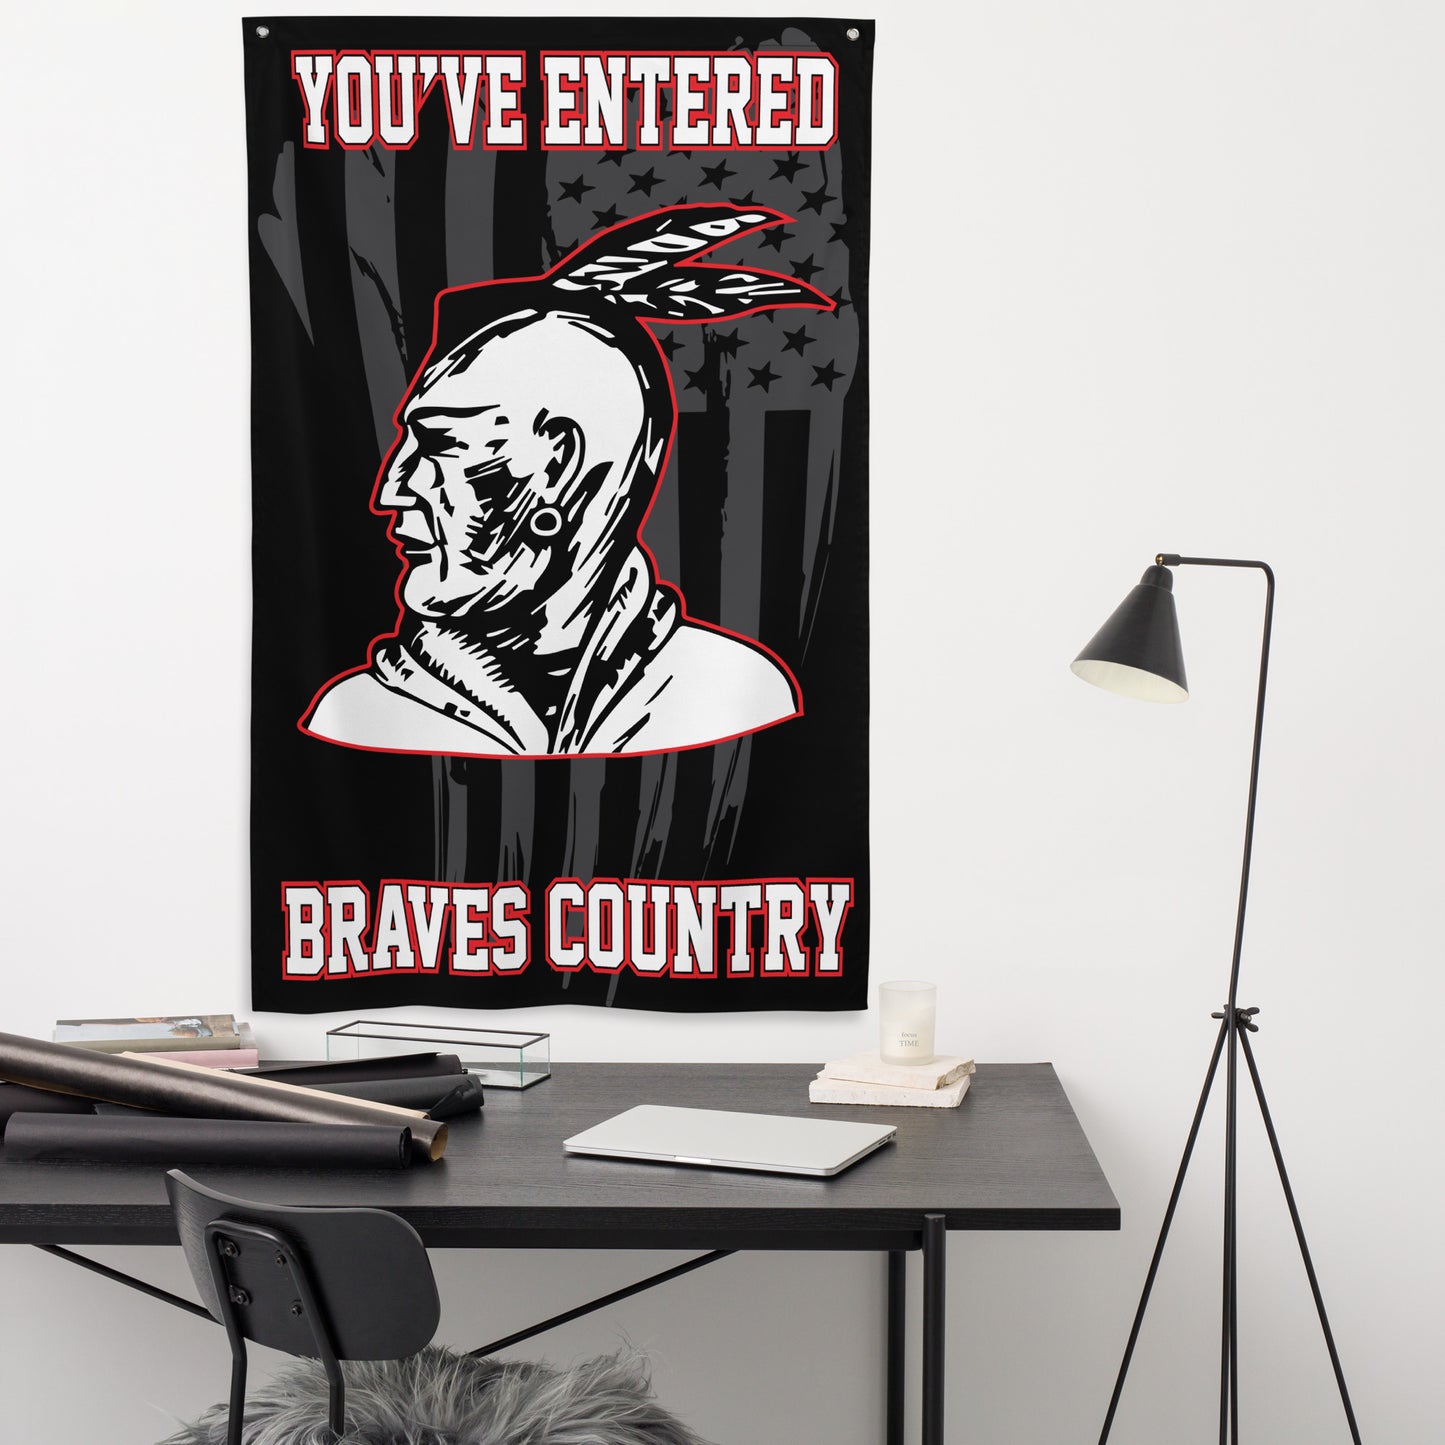 BRAVES Country BC 3' x 5' Flag